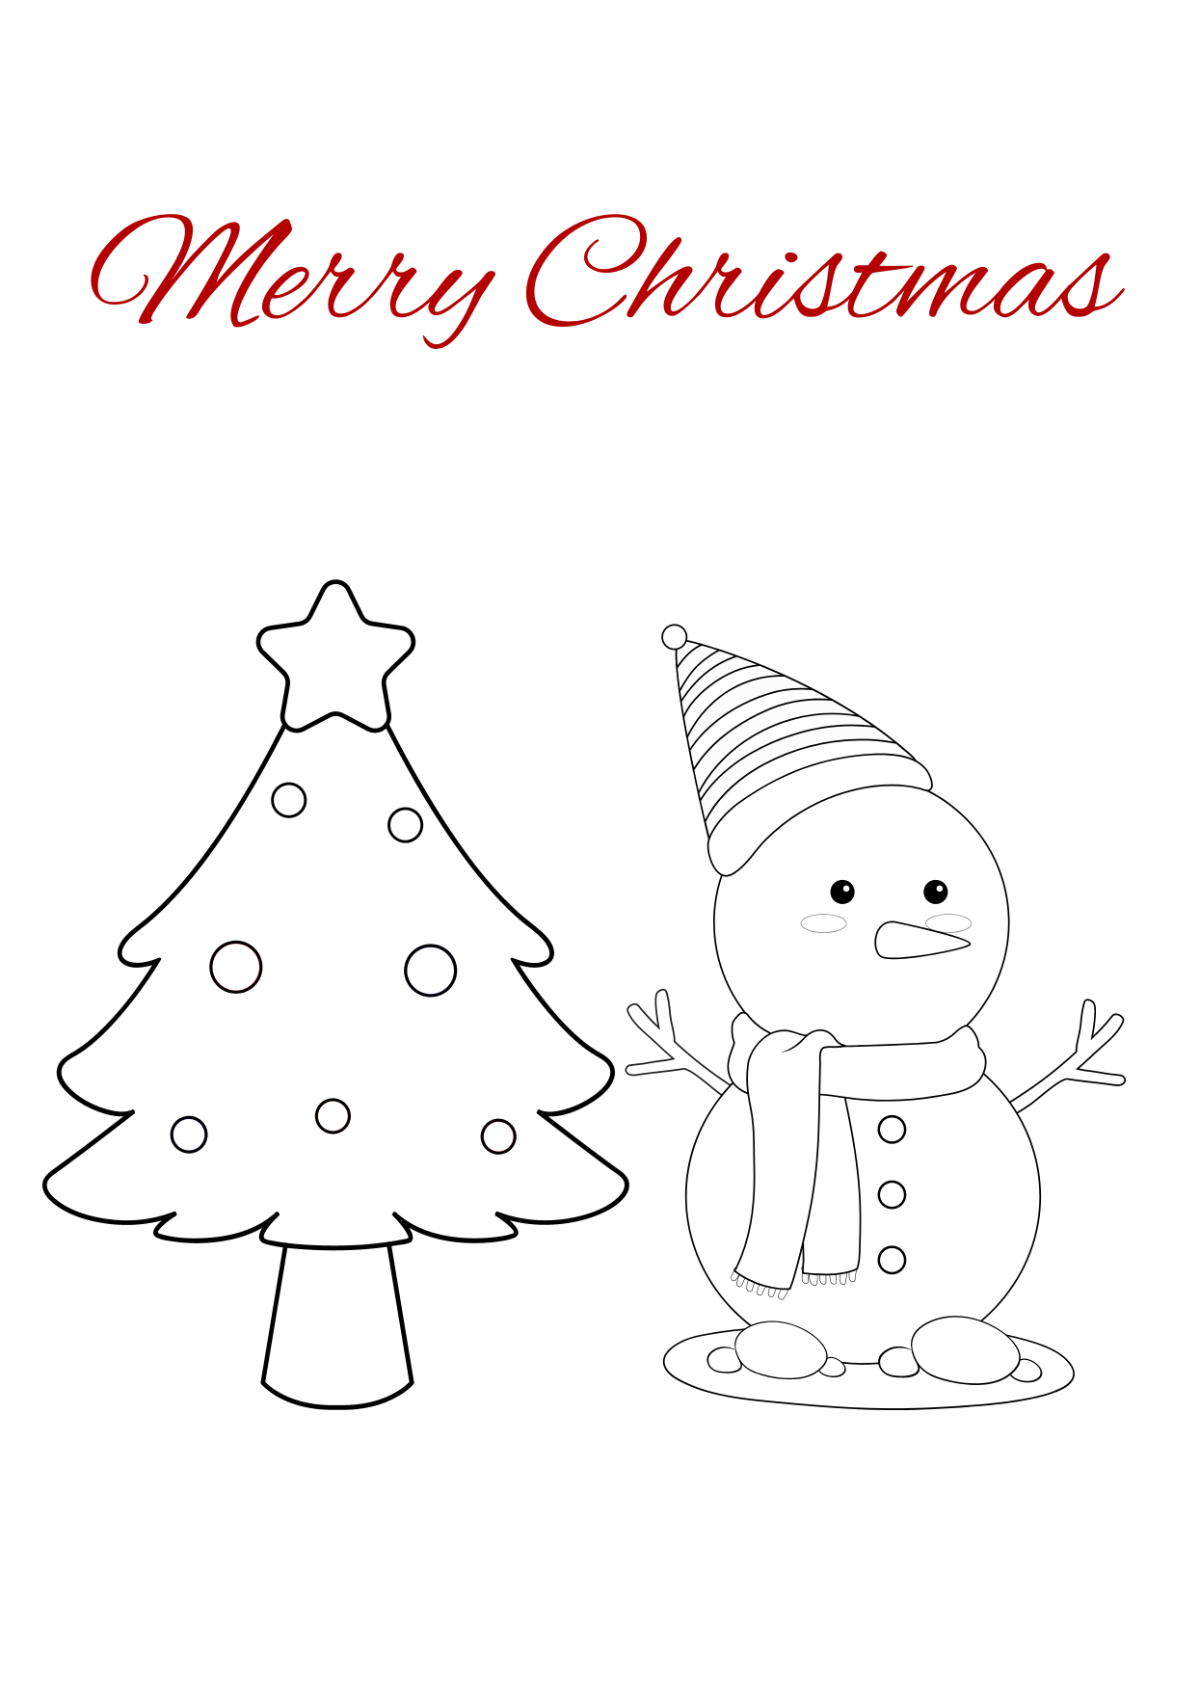 100,000 Merry chirstmas kids Vector Images | Depositphotos